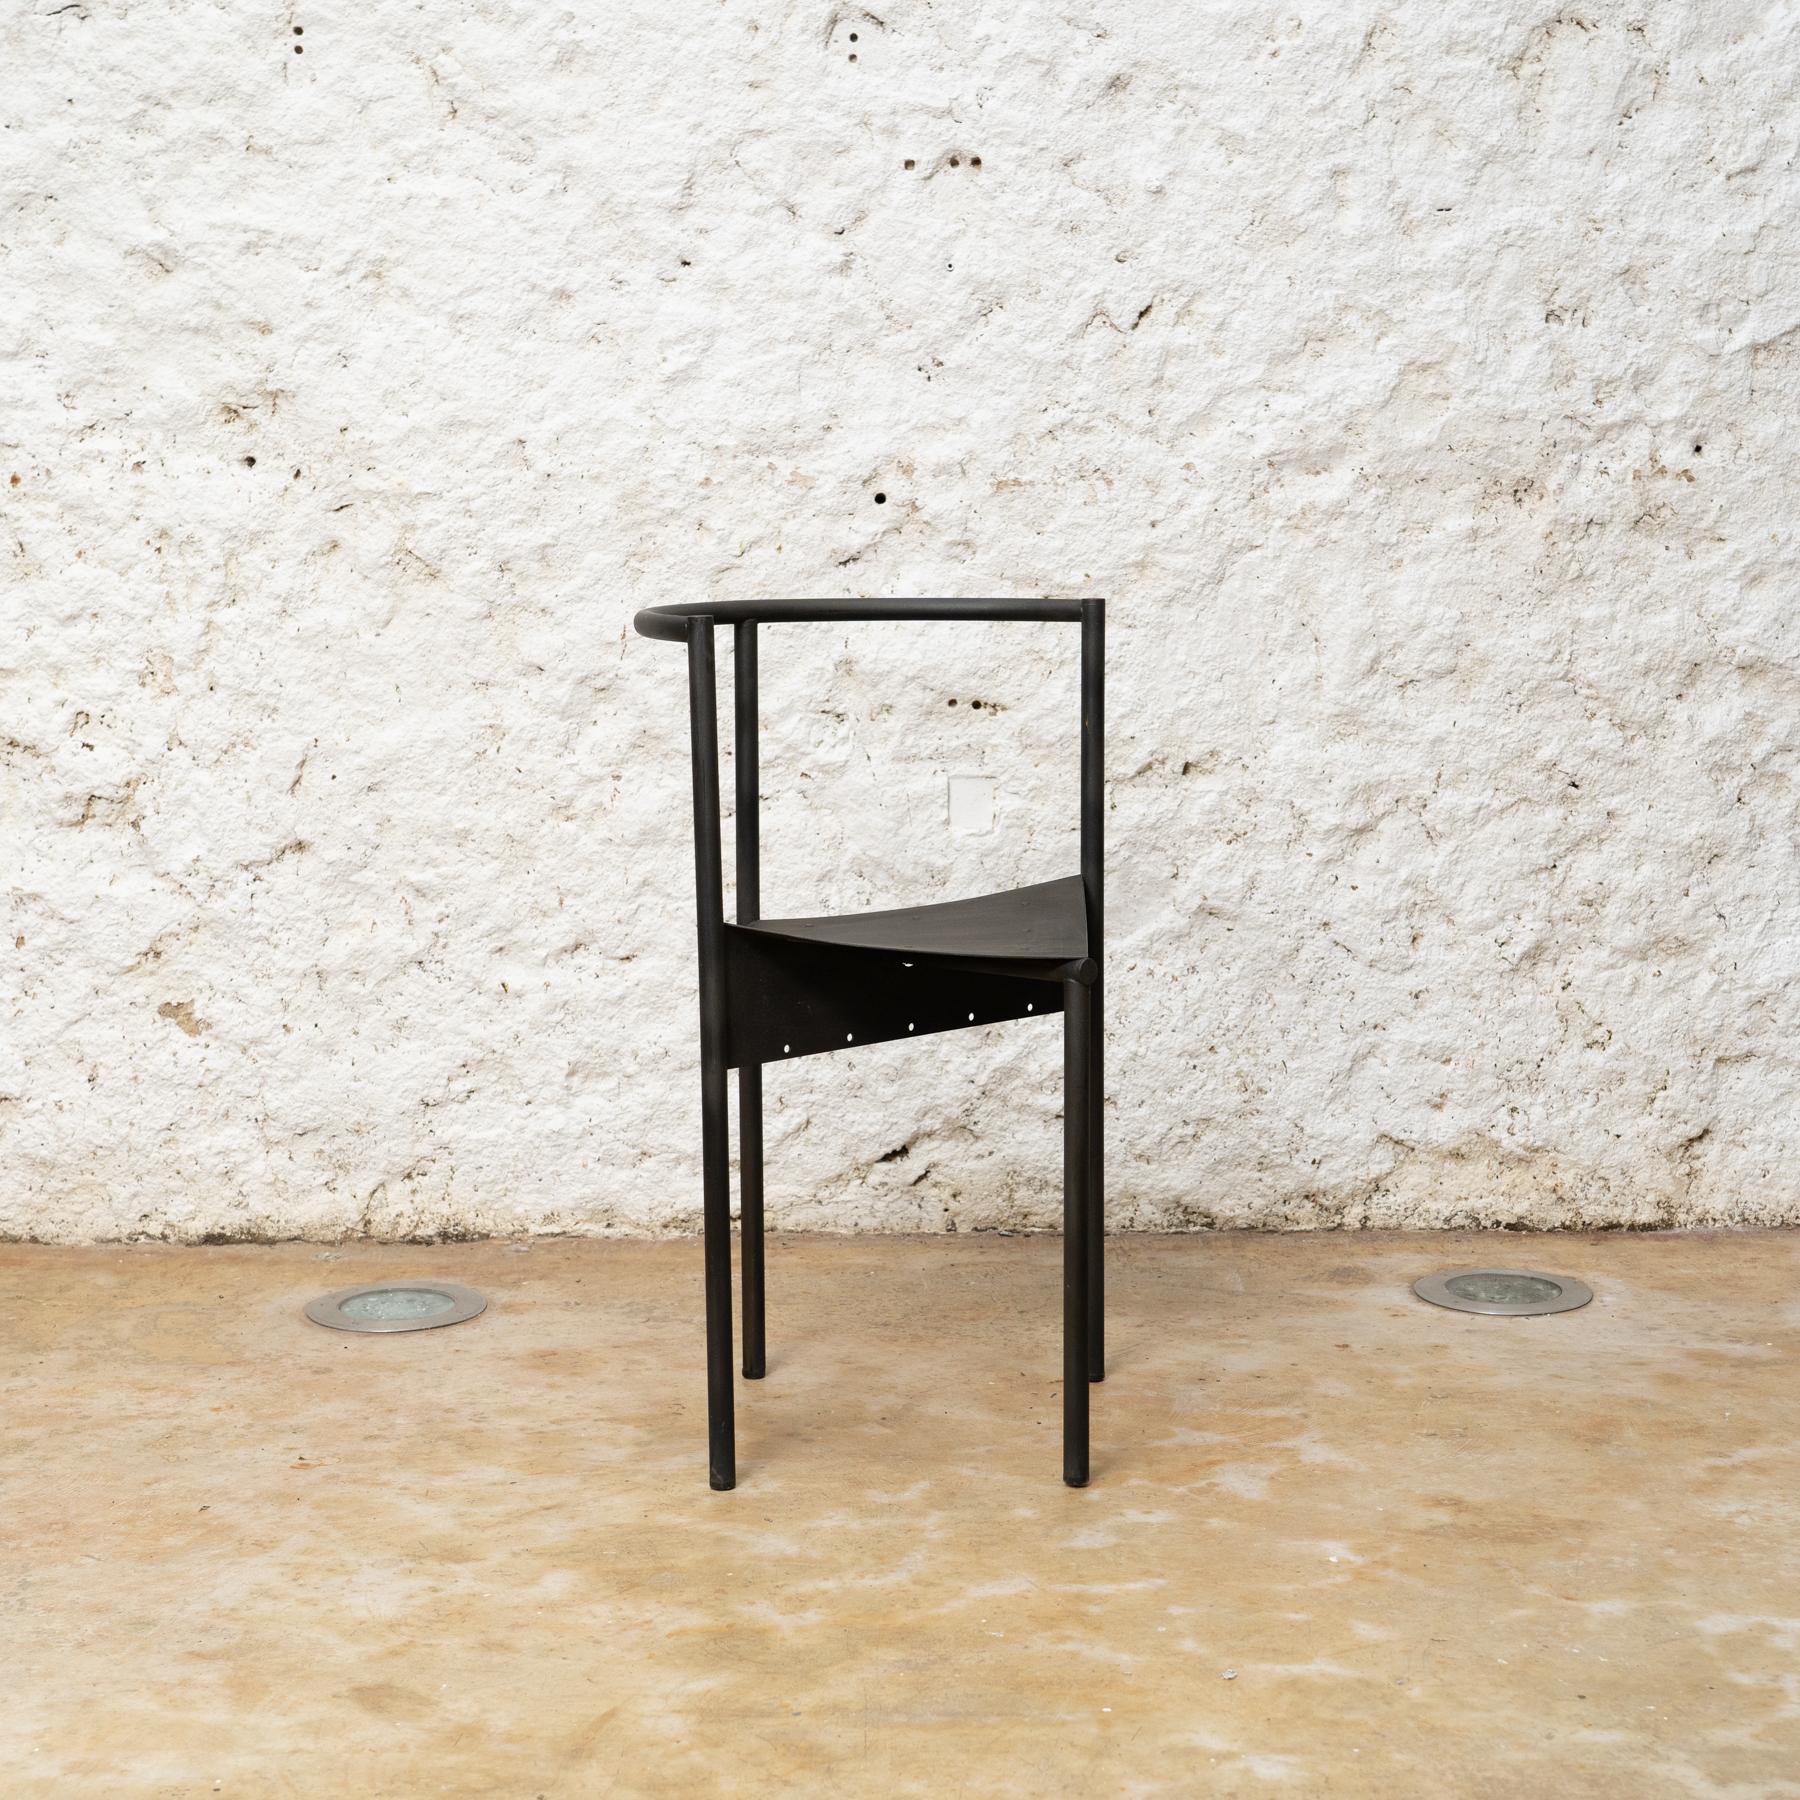 Spanish Chair Wendy Wright by Phillipe Starck for Disform, circa 1983 For Sale